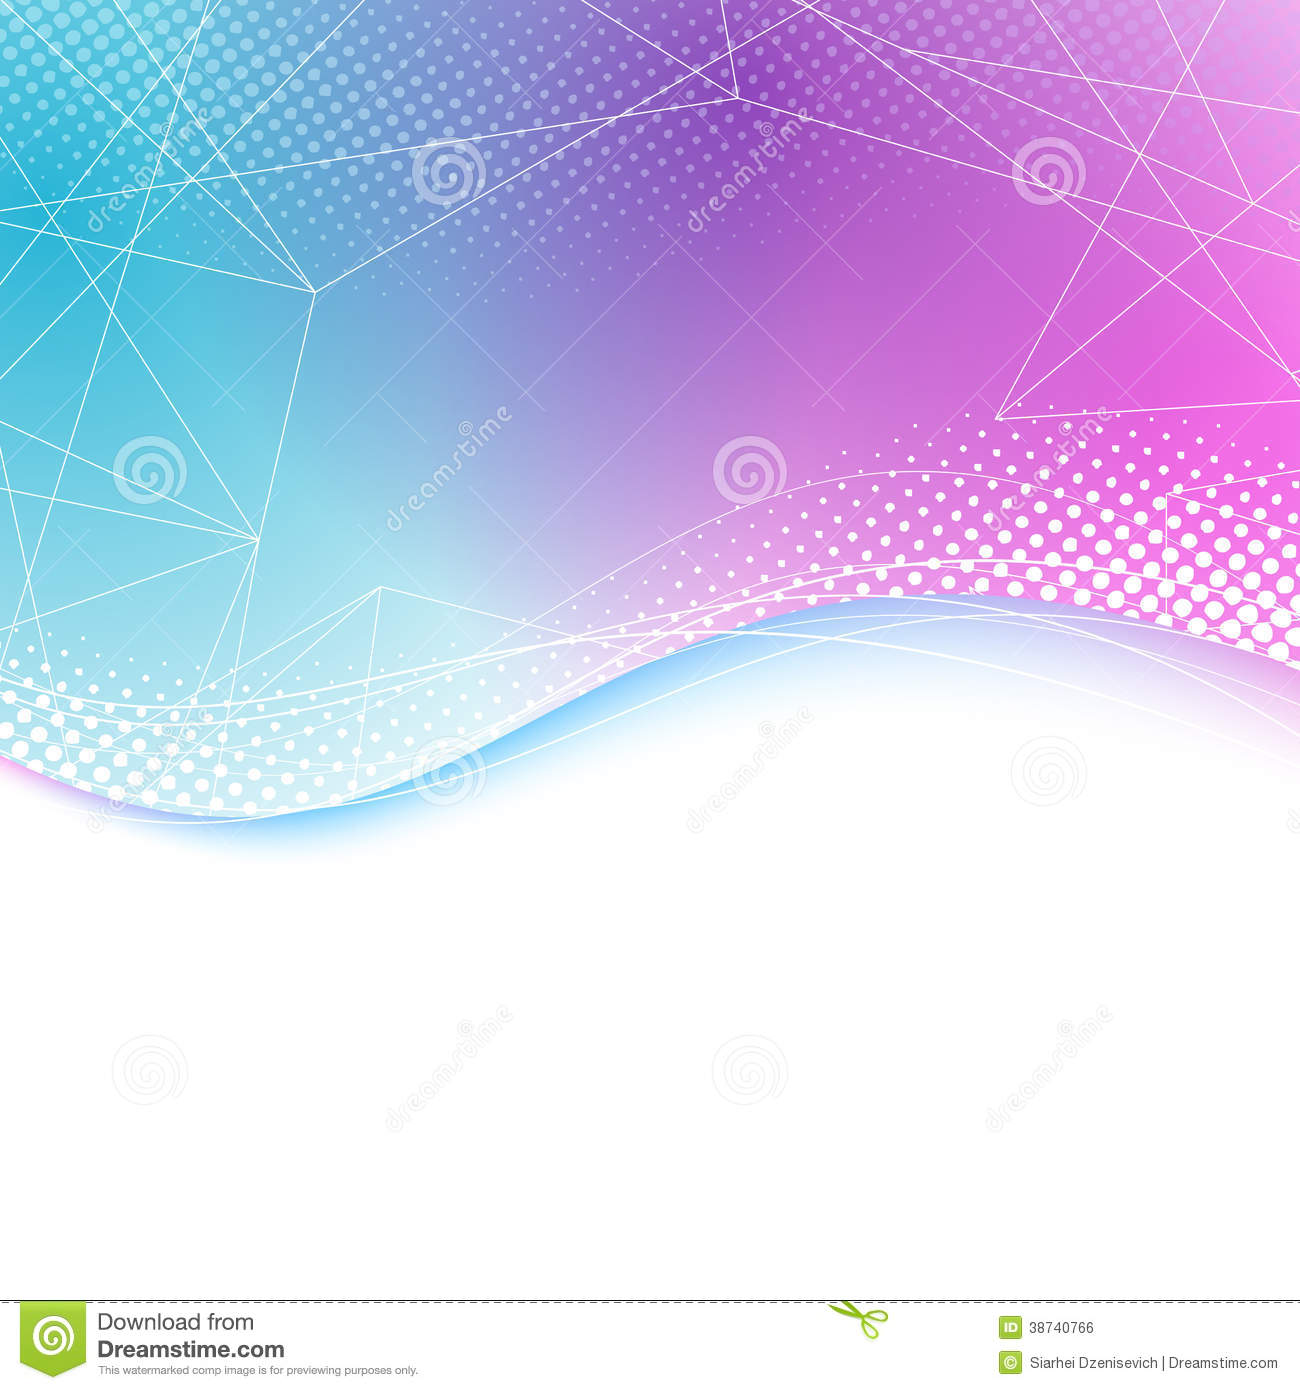 Transparent Bright Lines Background Border Royalty Free Stock Image    